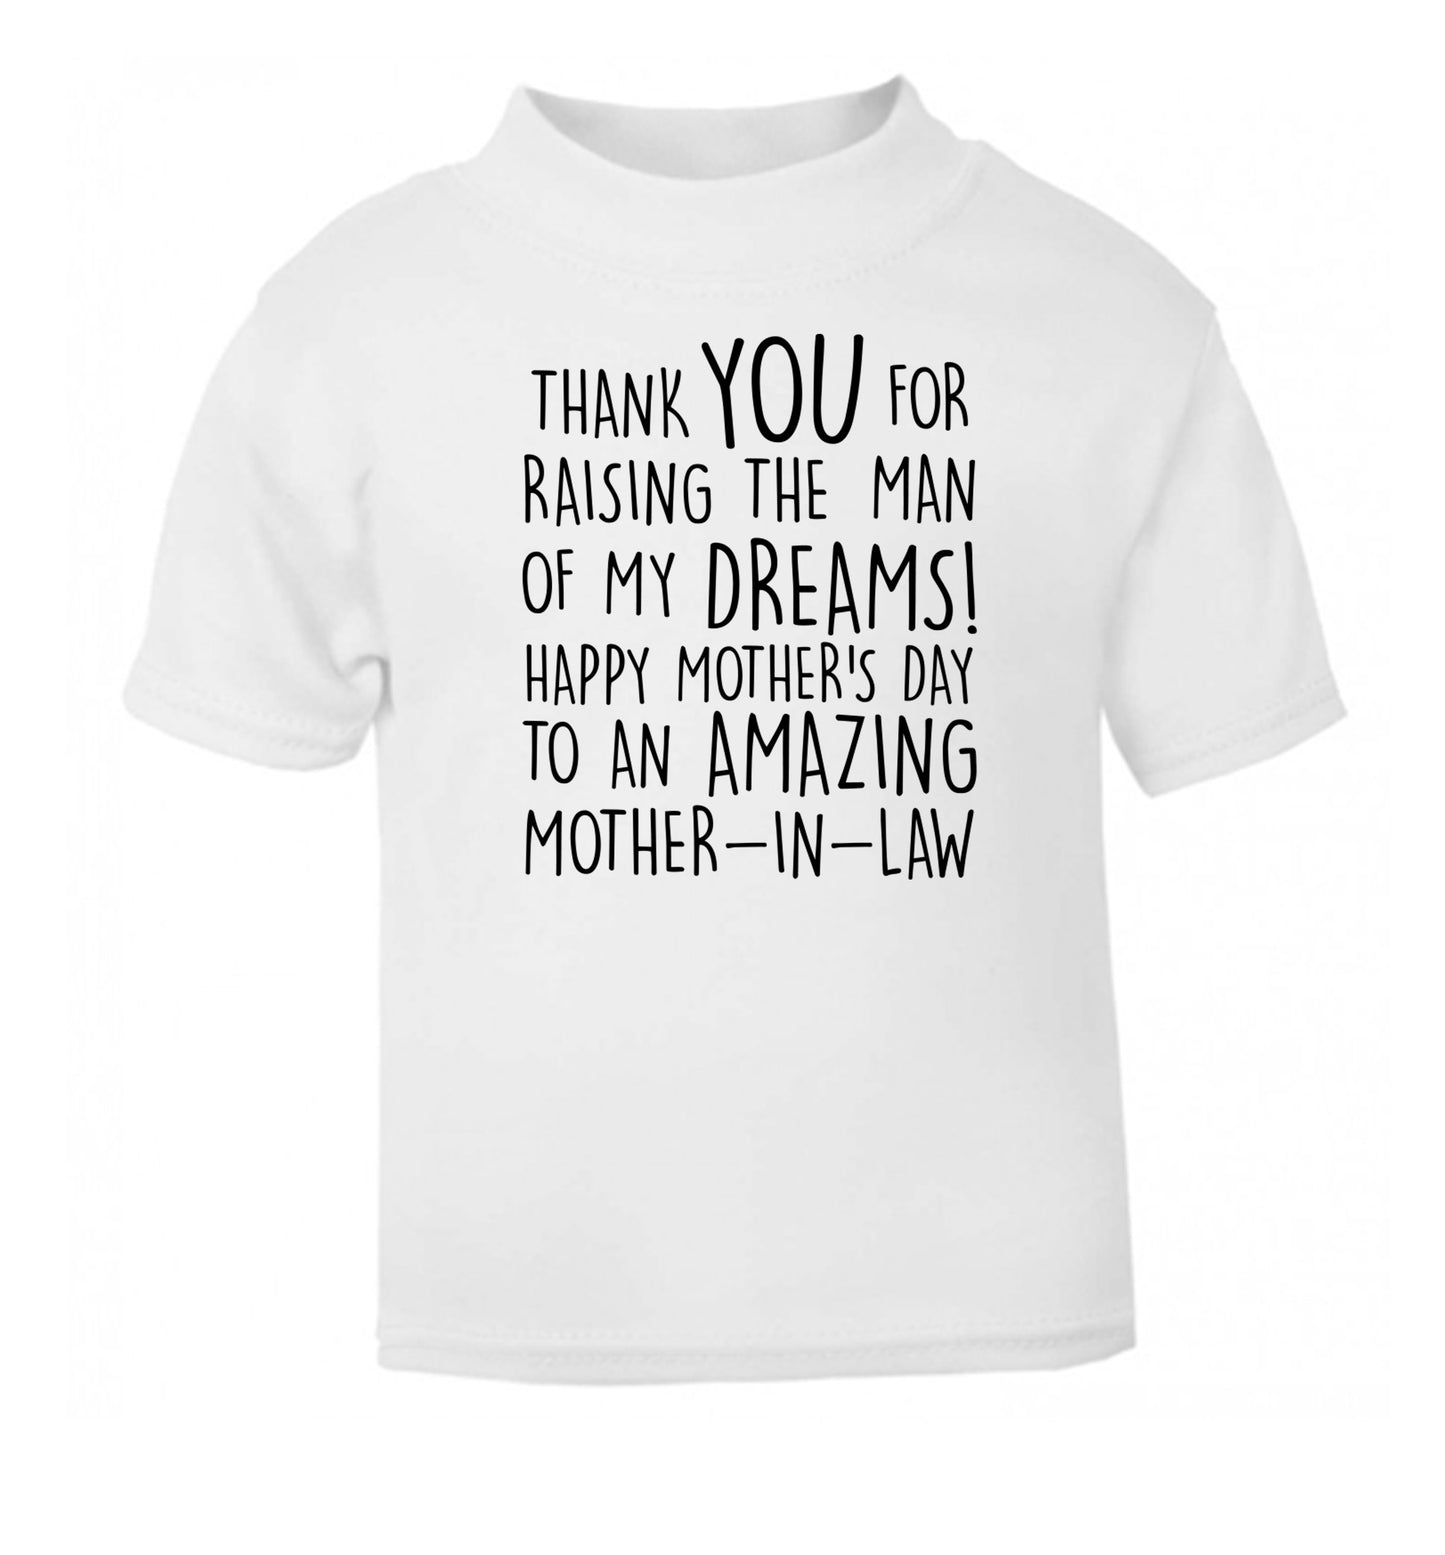 Thank you for raising the man of my dreams happy mother's day mother-in-law white Baby Toddler Tshirt 2 Years